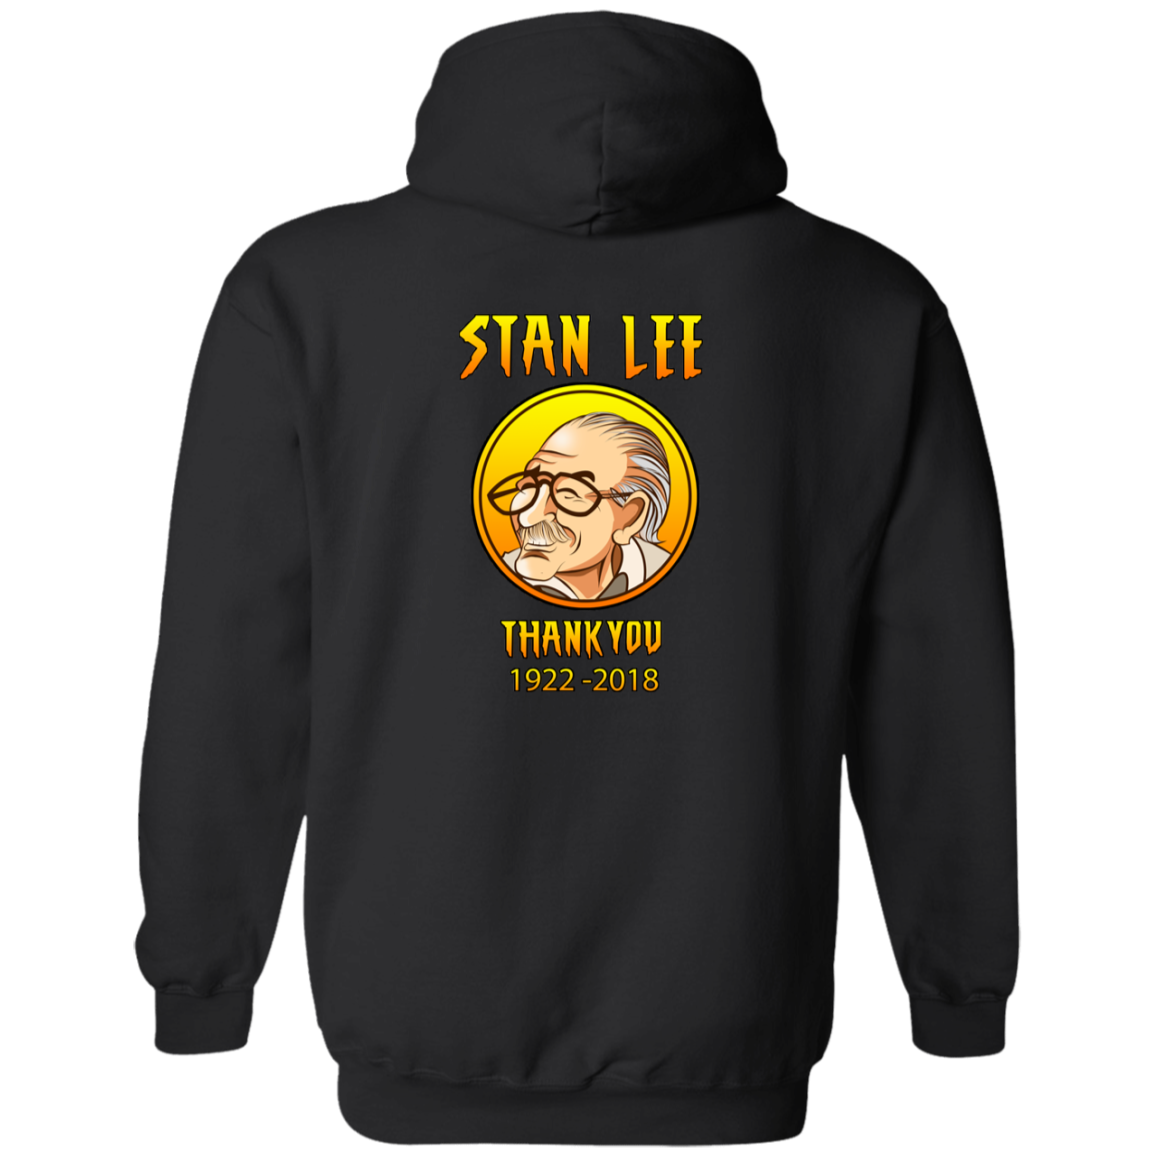 ArtichokeUSA Character and Font design. Stan Lee Thank You Fan Art. Let's Create Your Own Design Today. Zip Up Hooded Sweatshirt